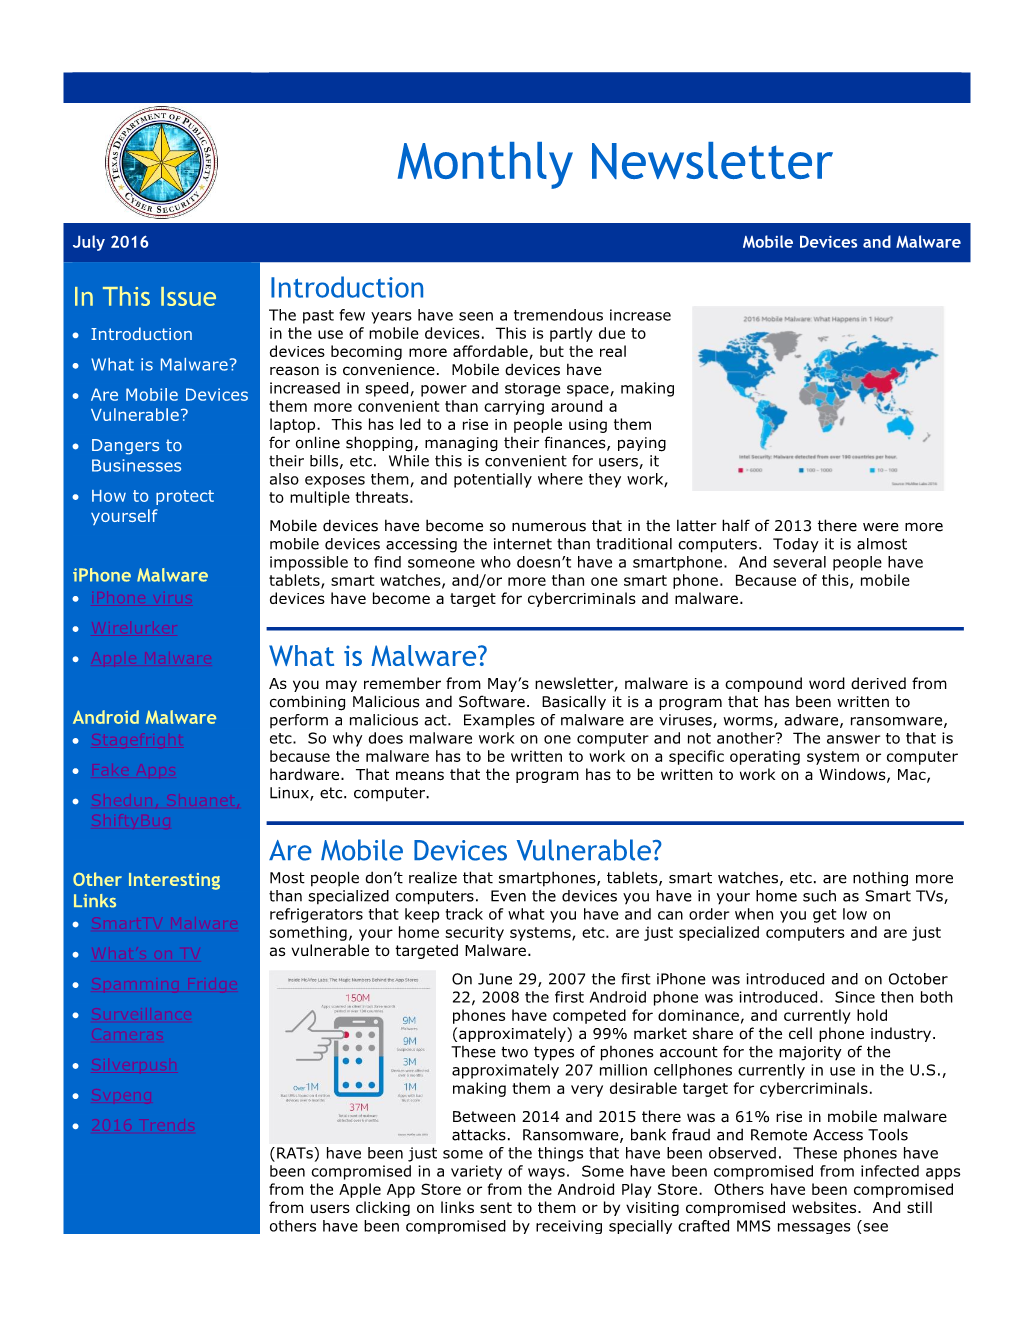 Cyber Security Newsletter